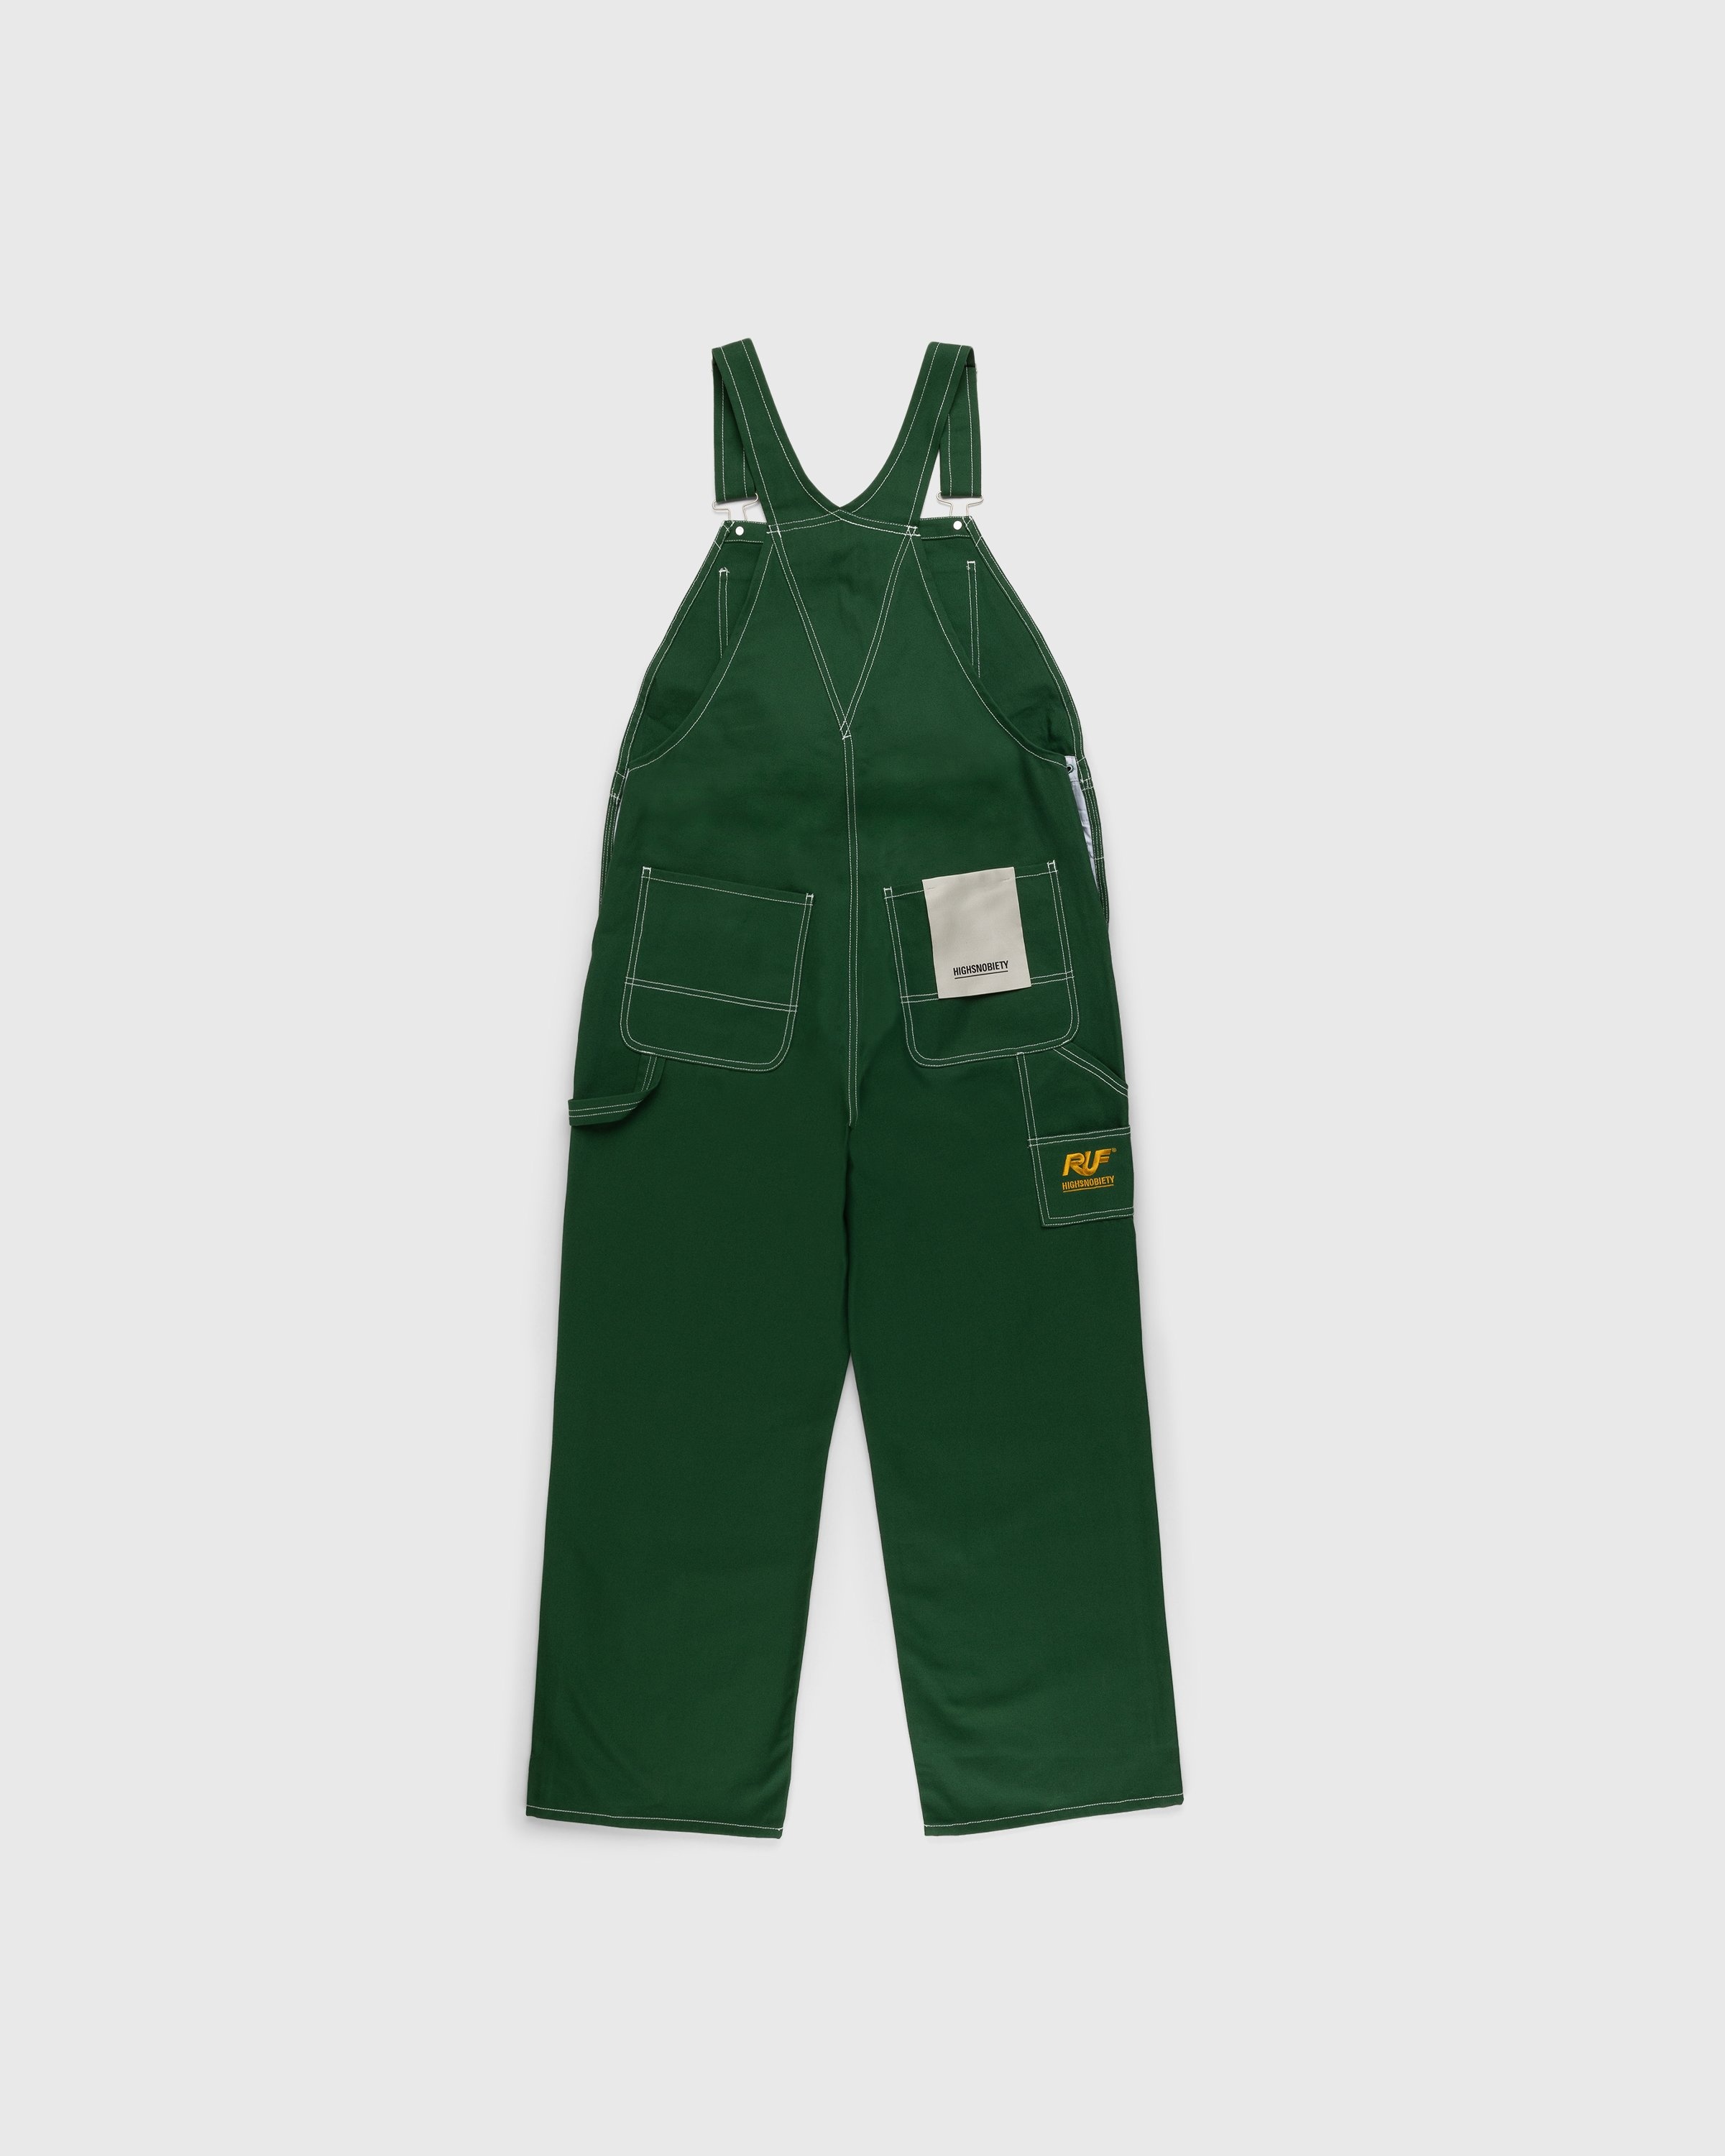 RUF x Highsnobiety – Cotton Overalls Green - Trousers - Green - Image 1